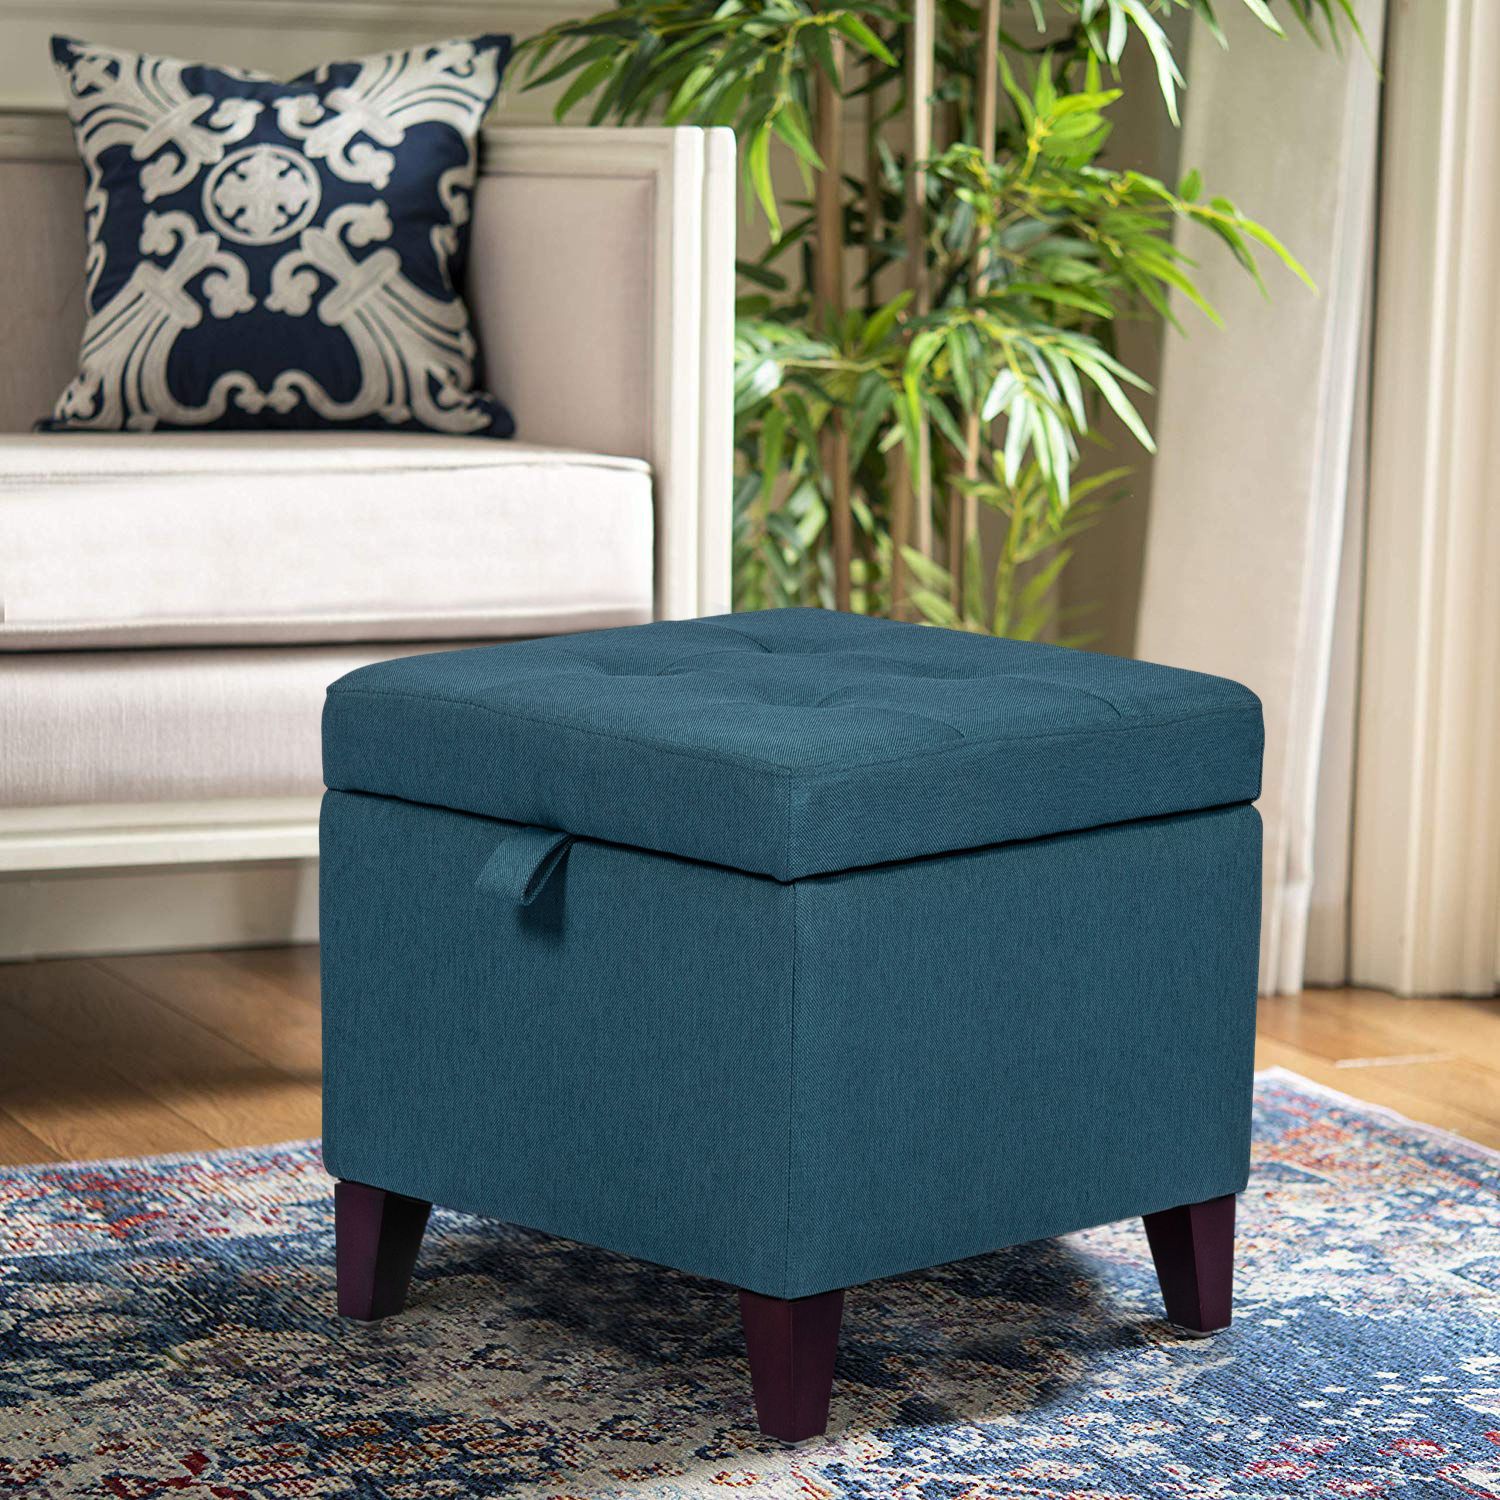 Joveco Fabric Storage Ottoman Button Tufted Footrest With Hinged Lid Inside Lavender Fabric Storage Ottomans (View 7 of 20)